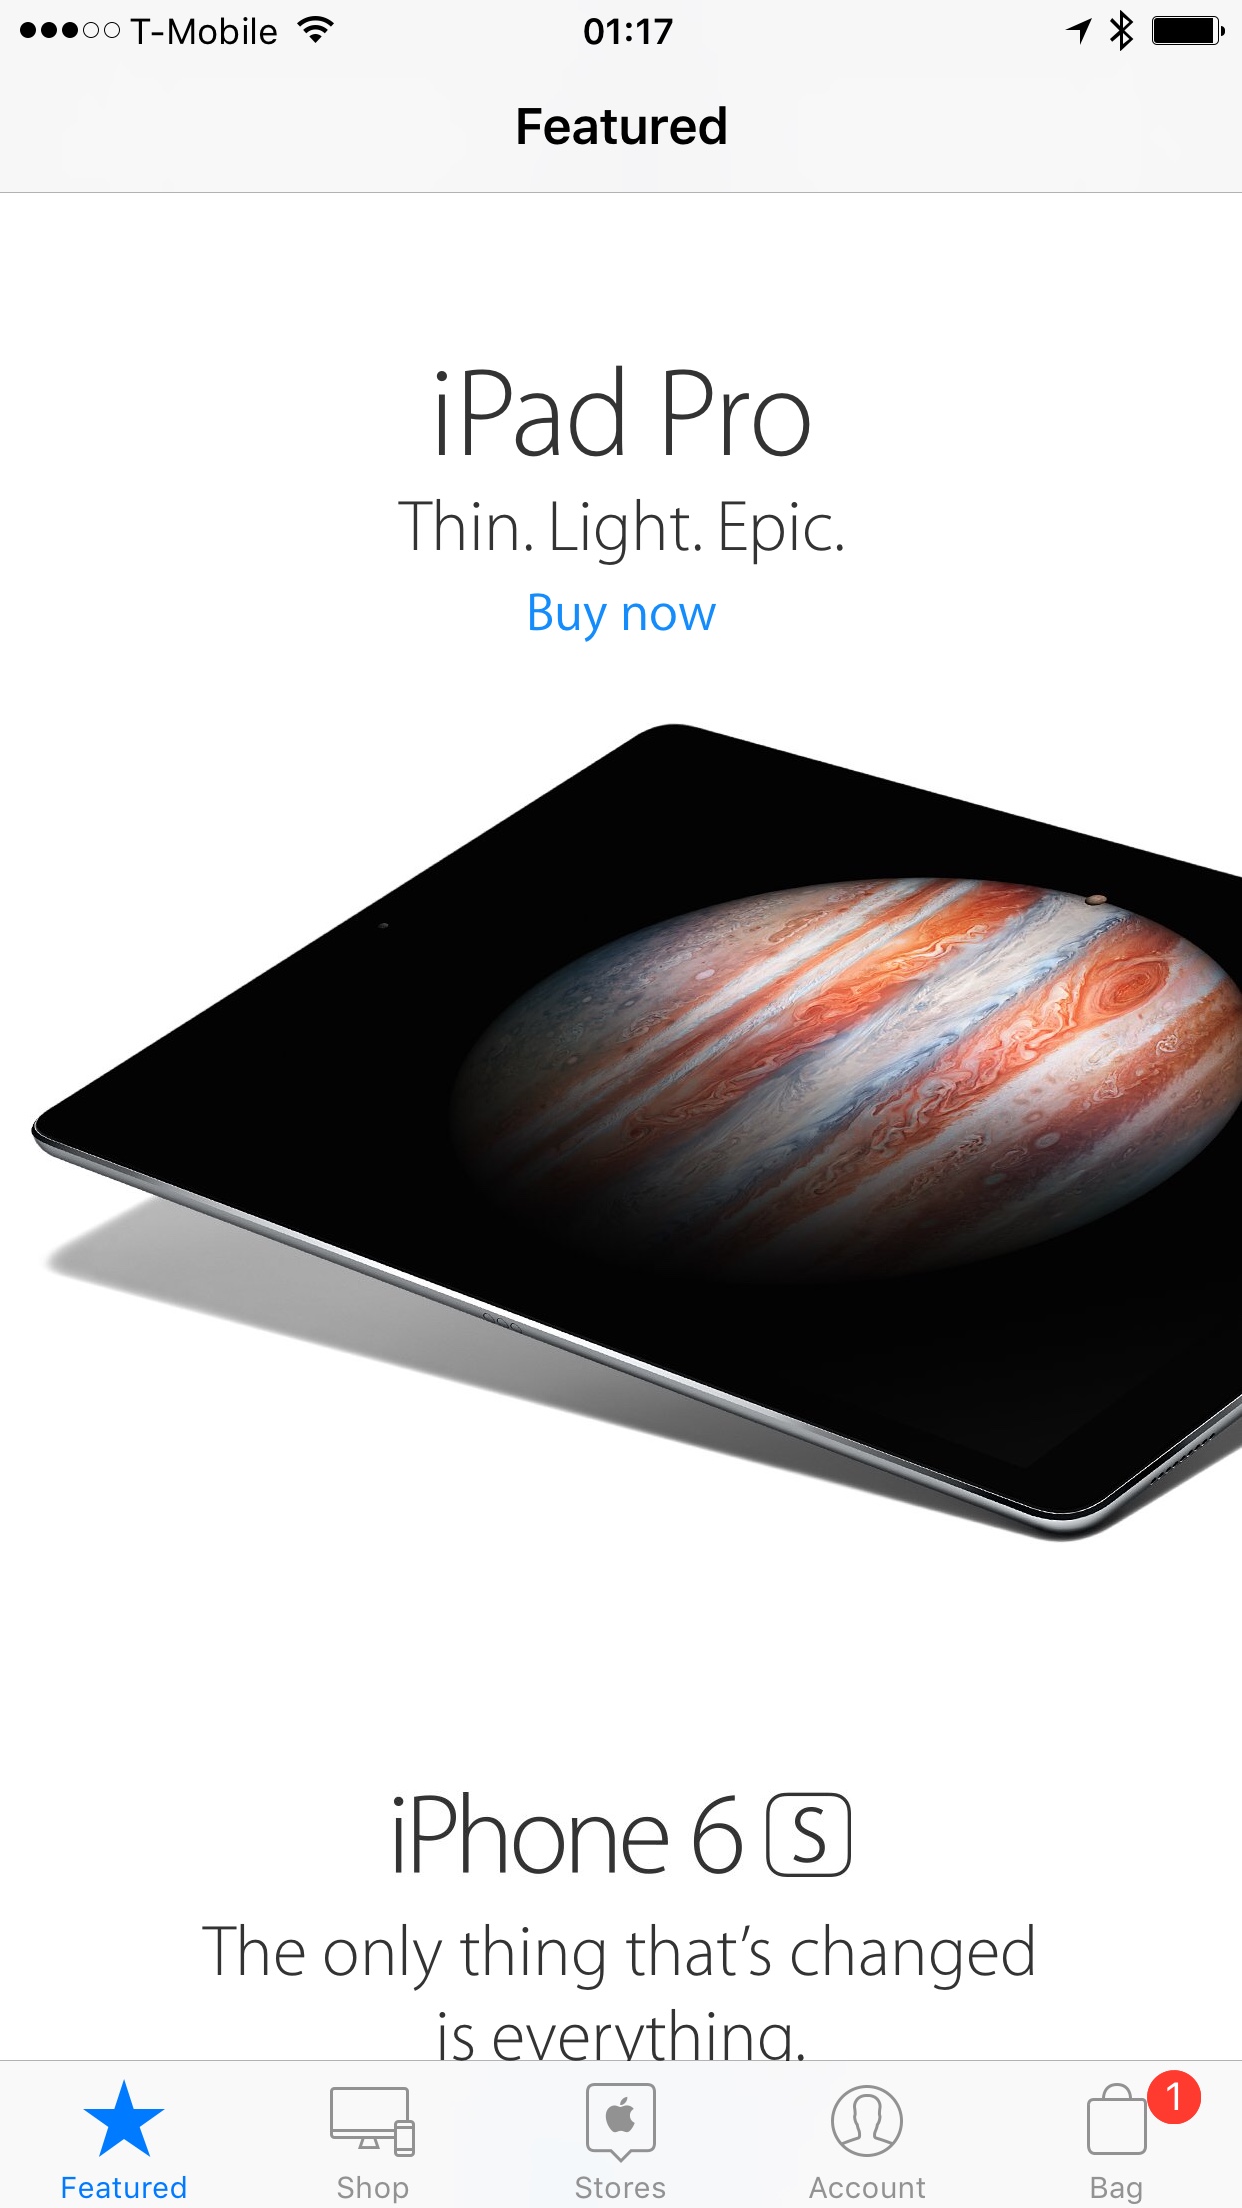 iPad Pro is now available